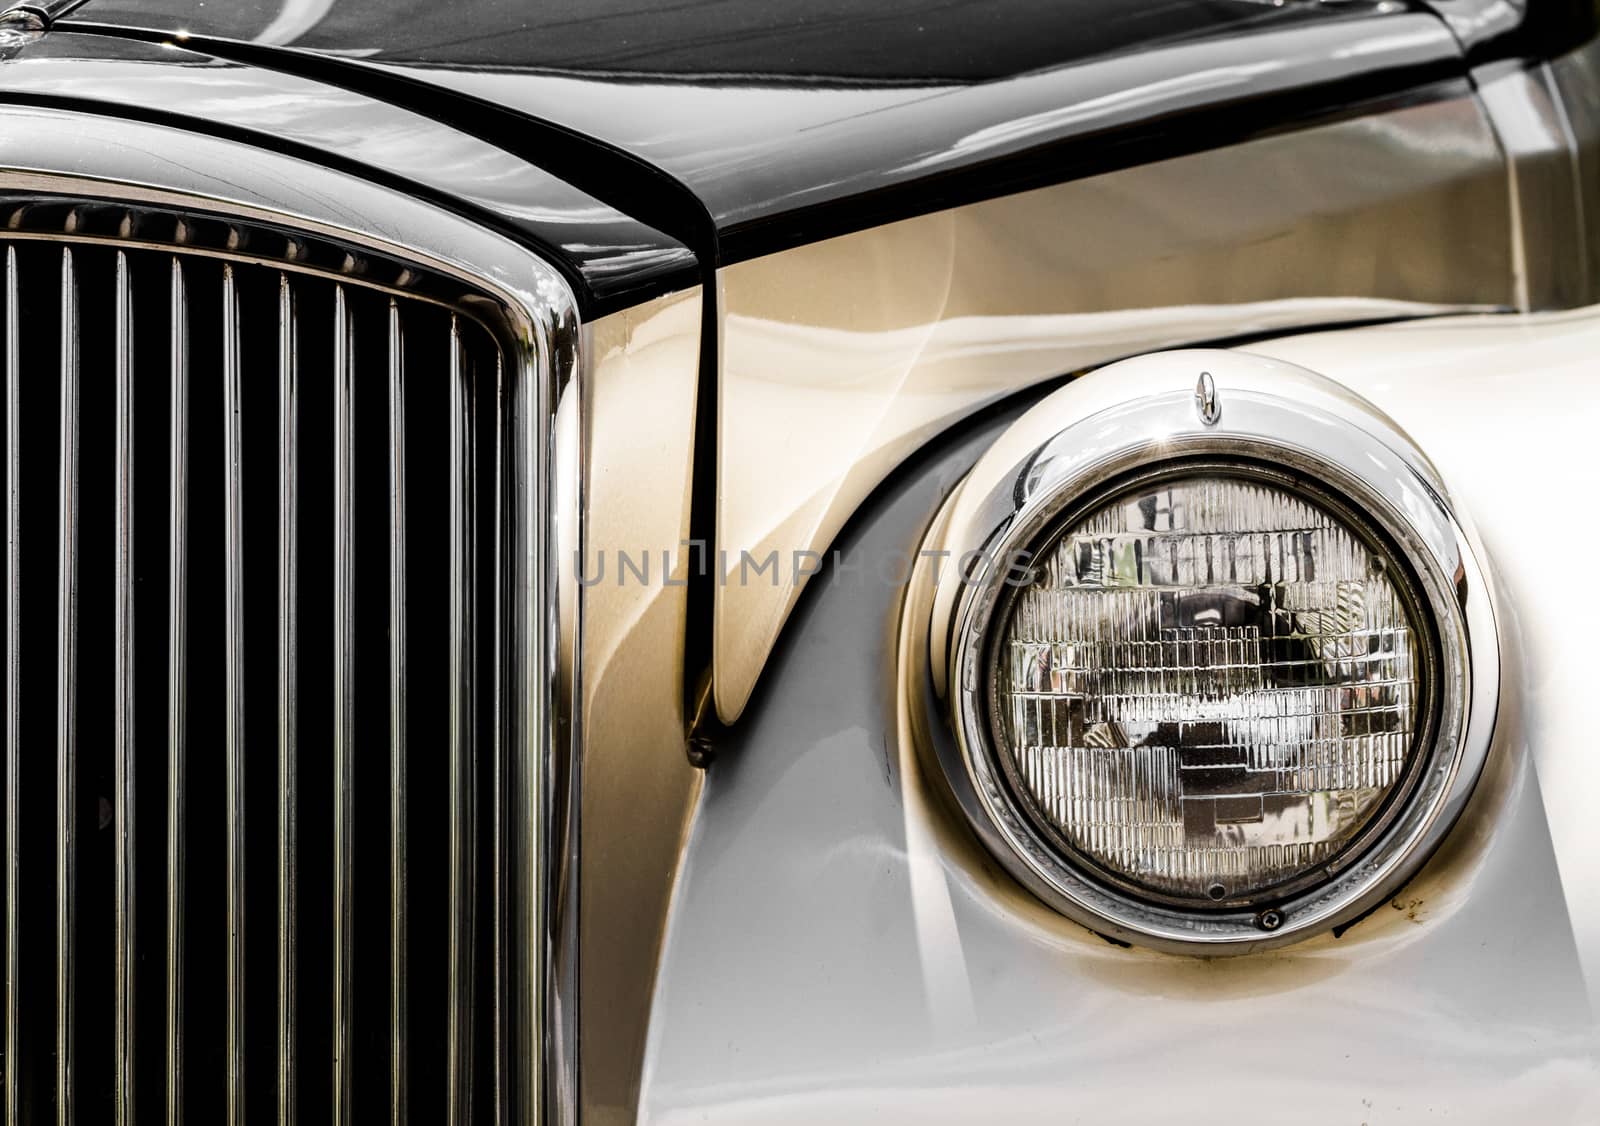 Shiny Antic Limousine Closeup of the Front by aetb